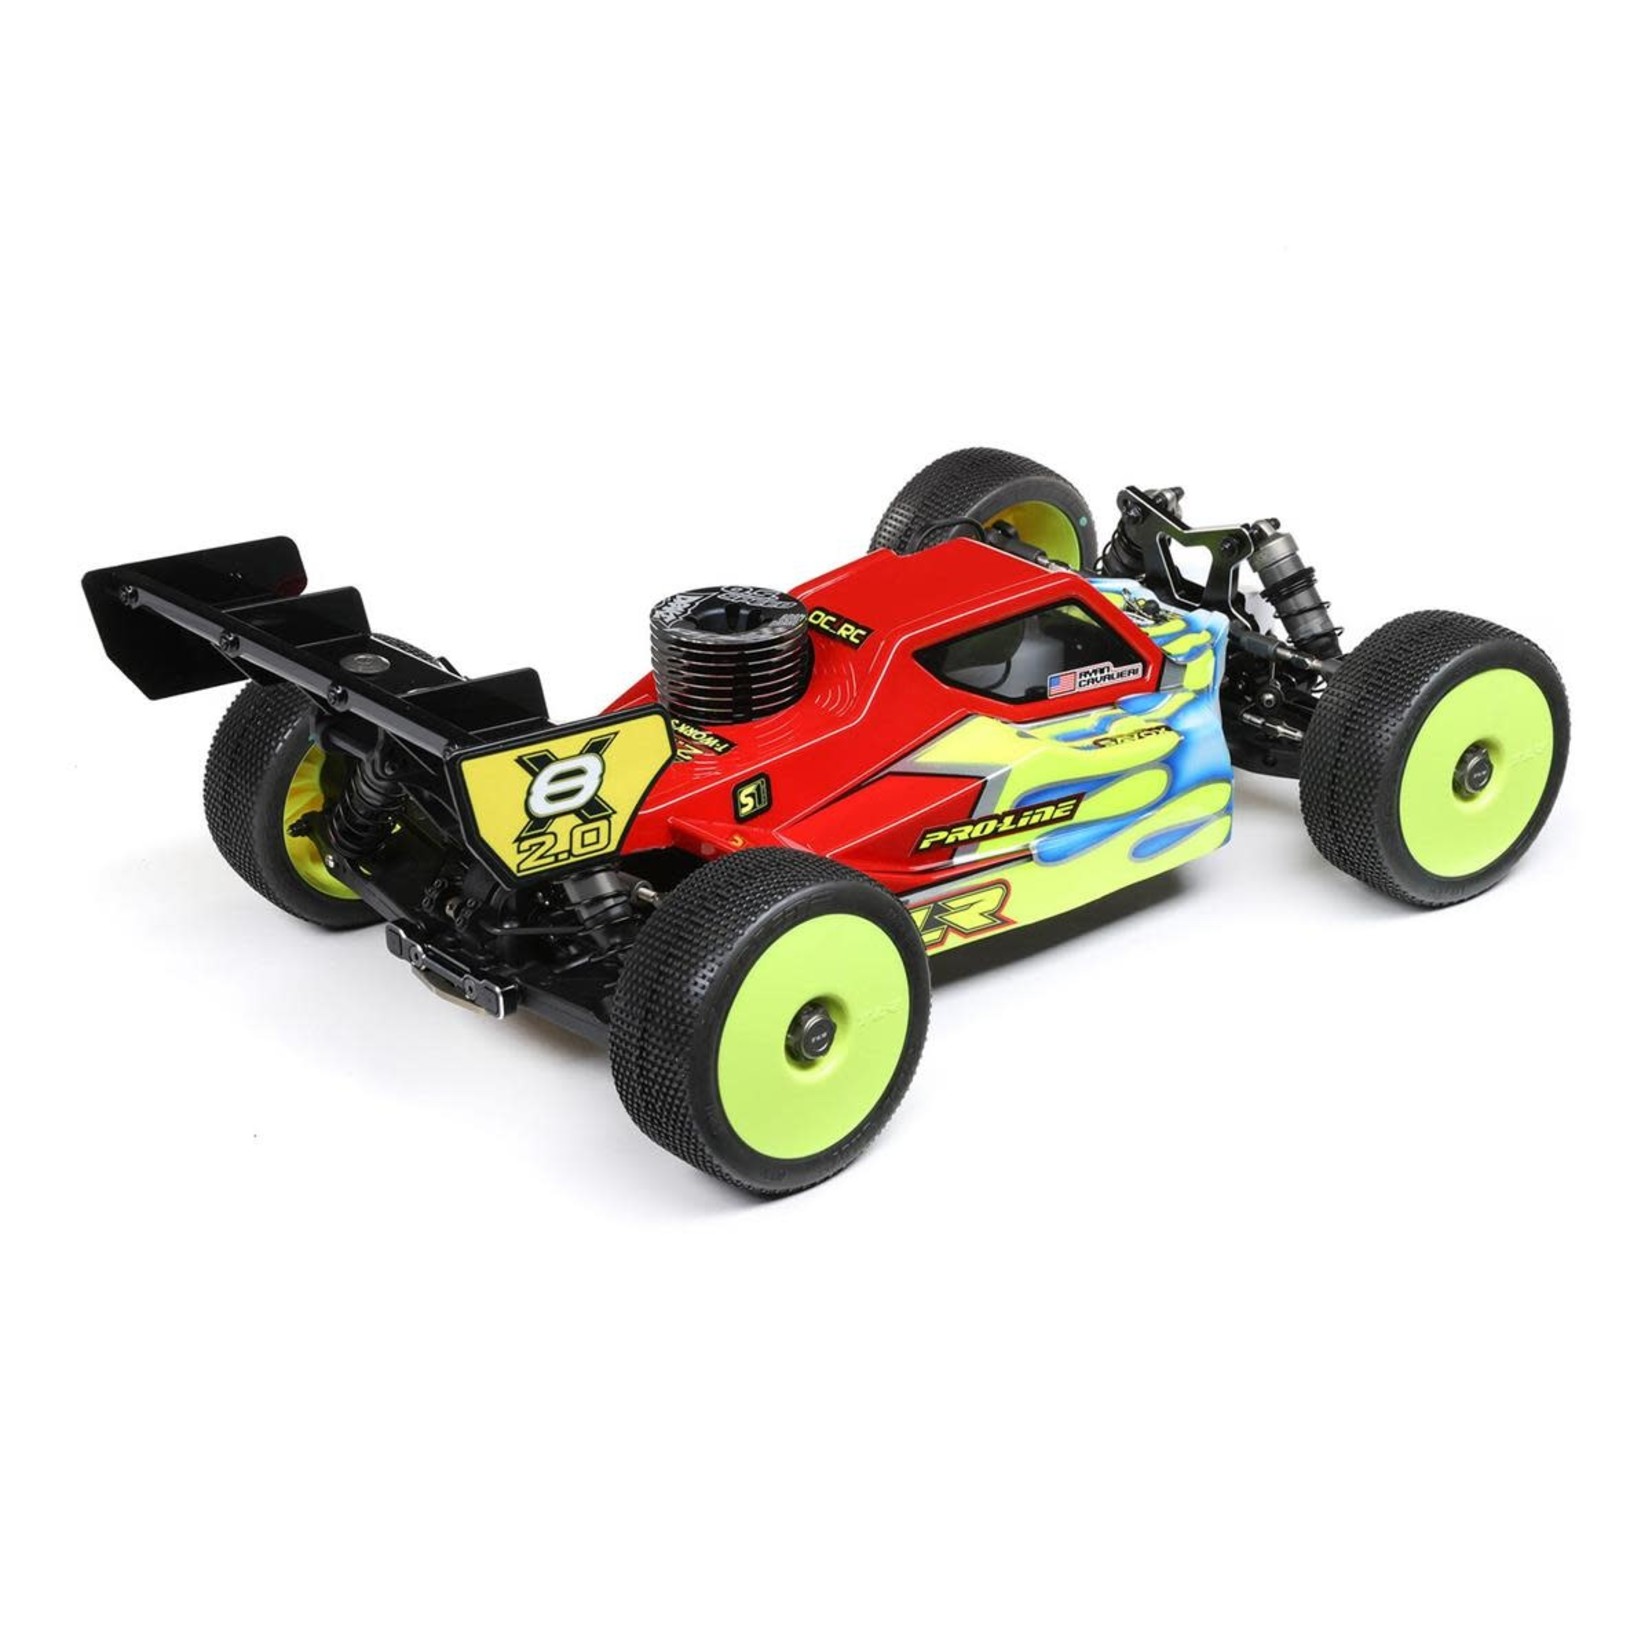 TLR Team Losi Racing 8IGHT-X/E 2.0 Combo Nitro/Electric 1/8 4x4 Off-Road Buggy Kit #TLR04012